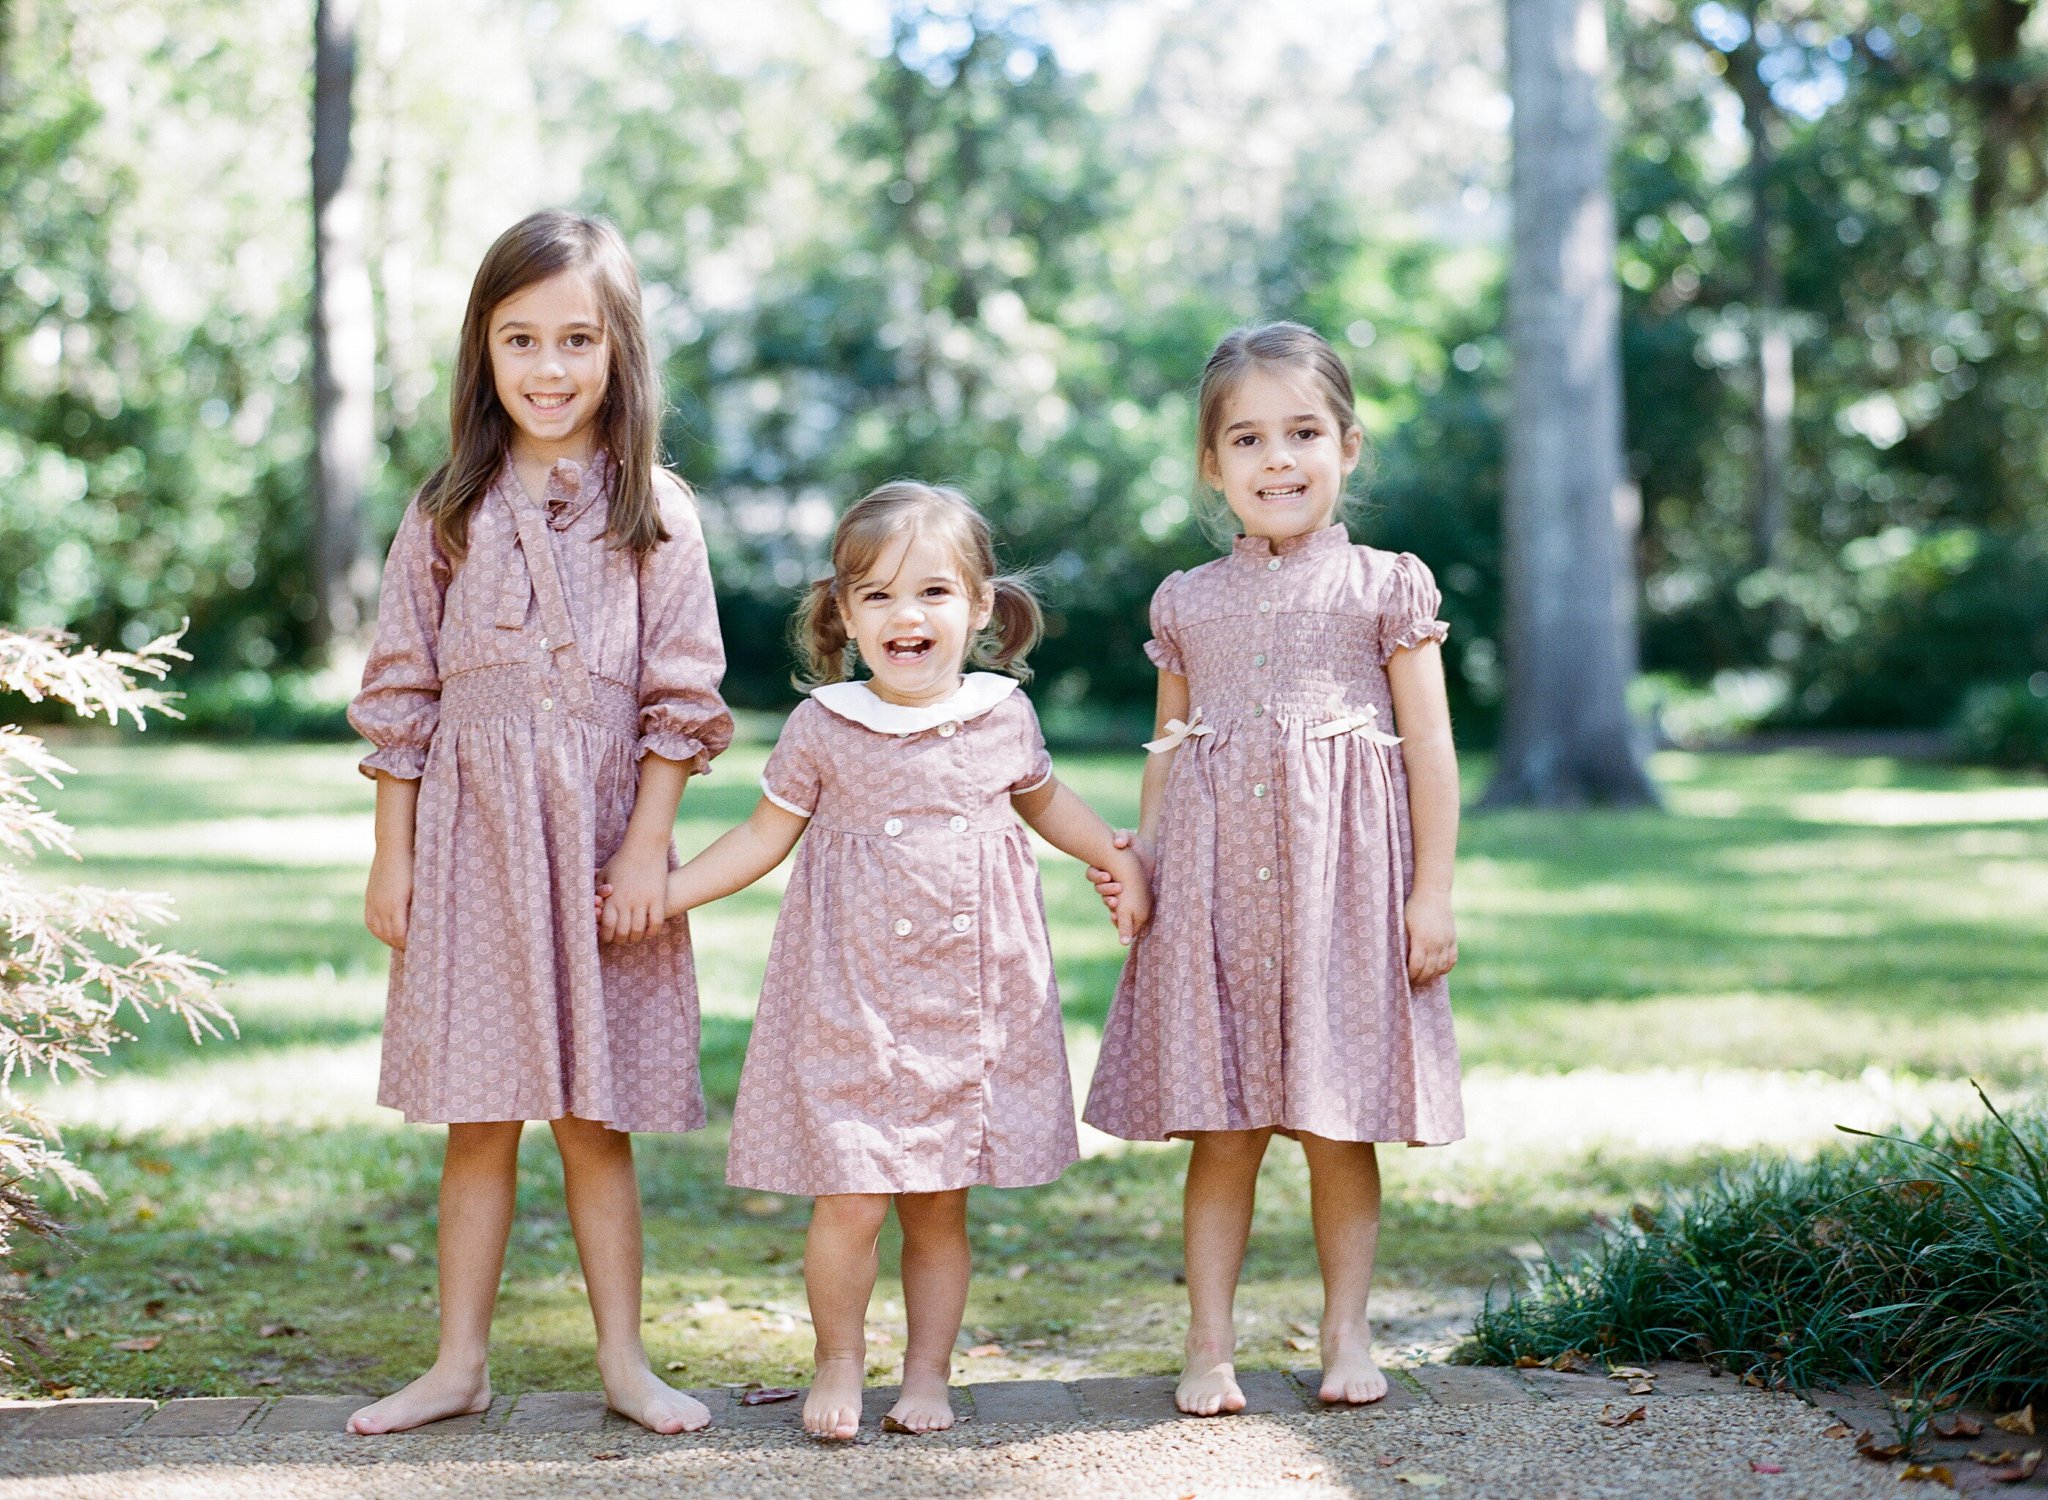 tallahassee family photographer shannon griffin photography_0040.jpg